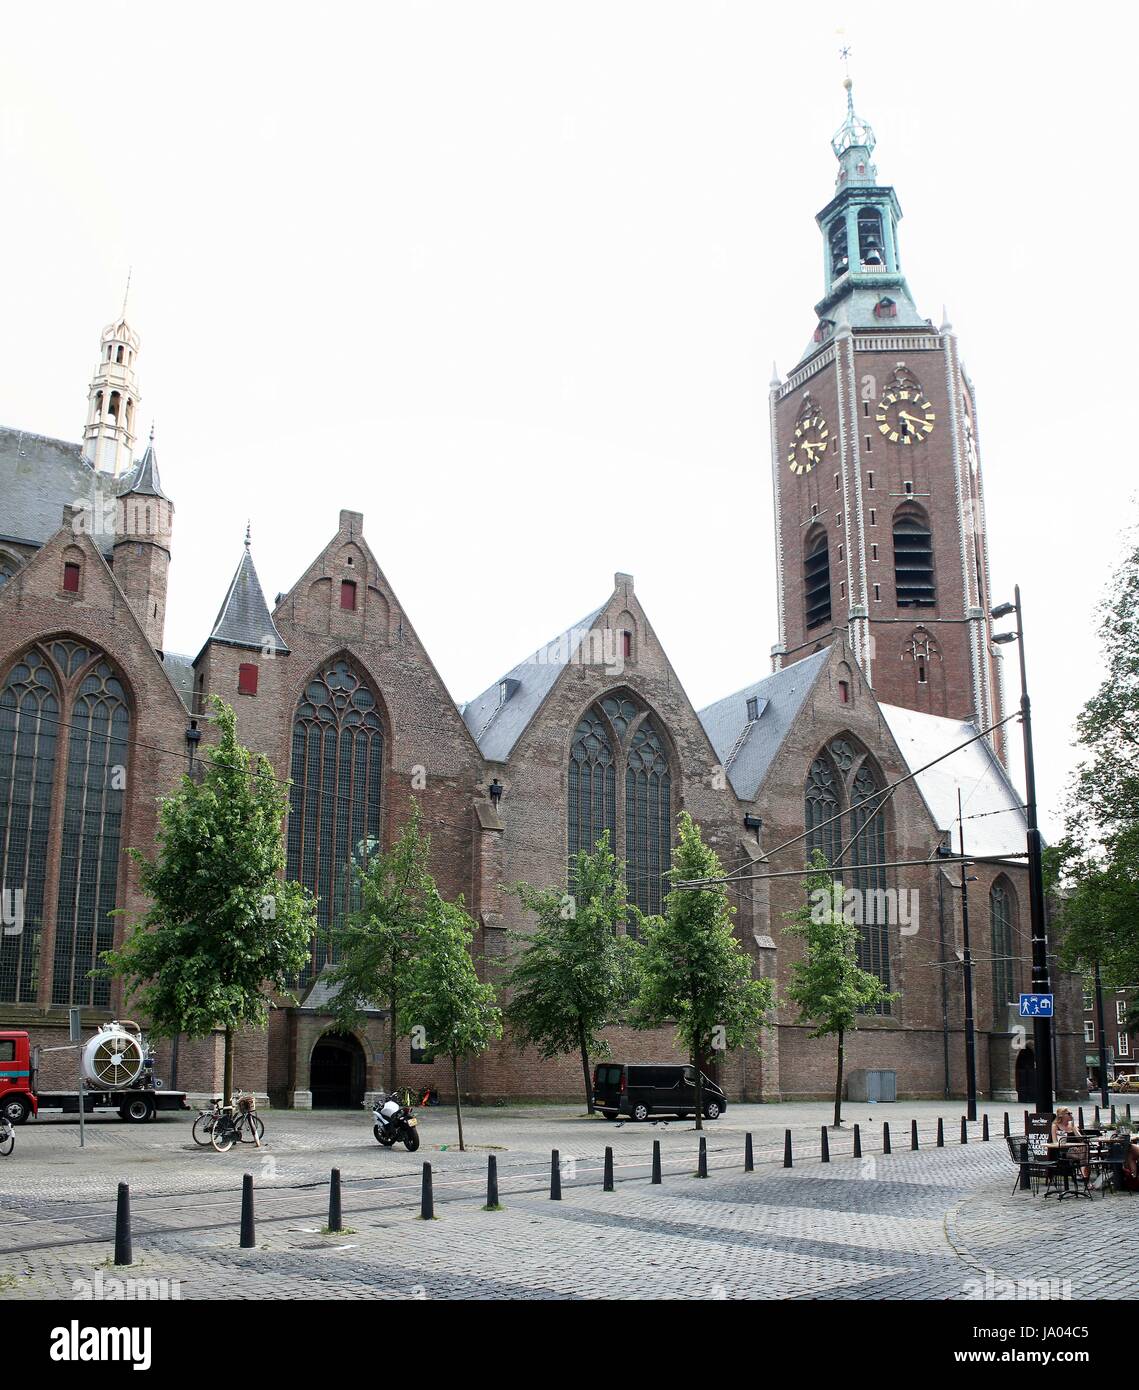 Grote of Sint-Jacobskerk (Great Church or St. James Church) is a landmark Protestant church in central The Hague, Netherlands. (stitch of 2 images). Stock Photo